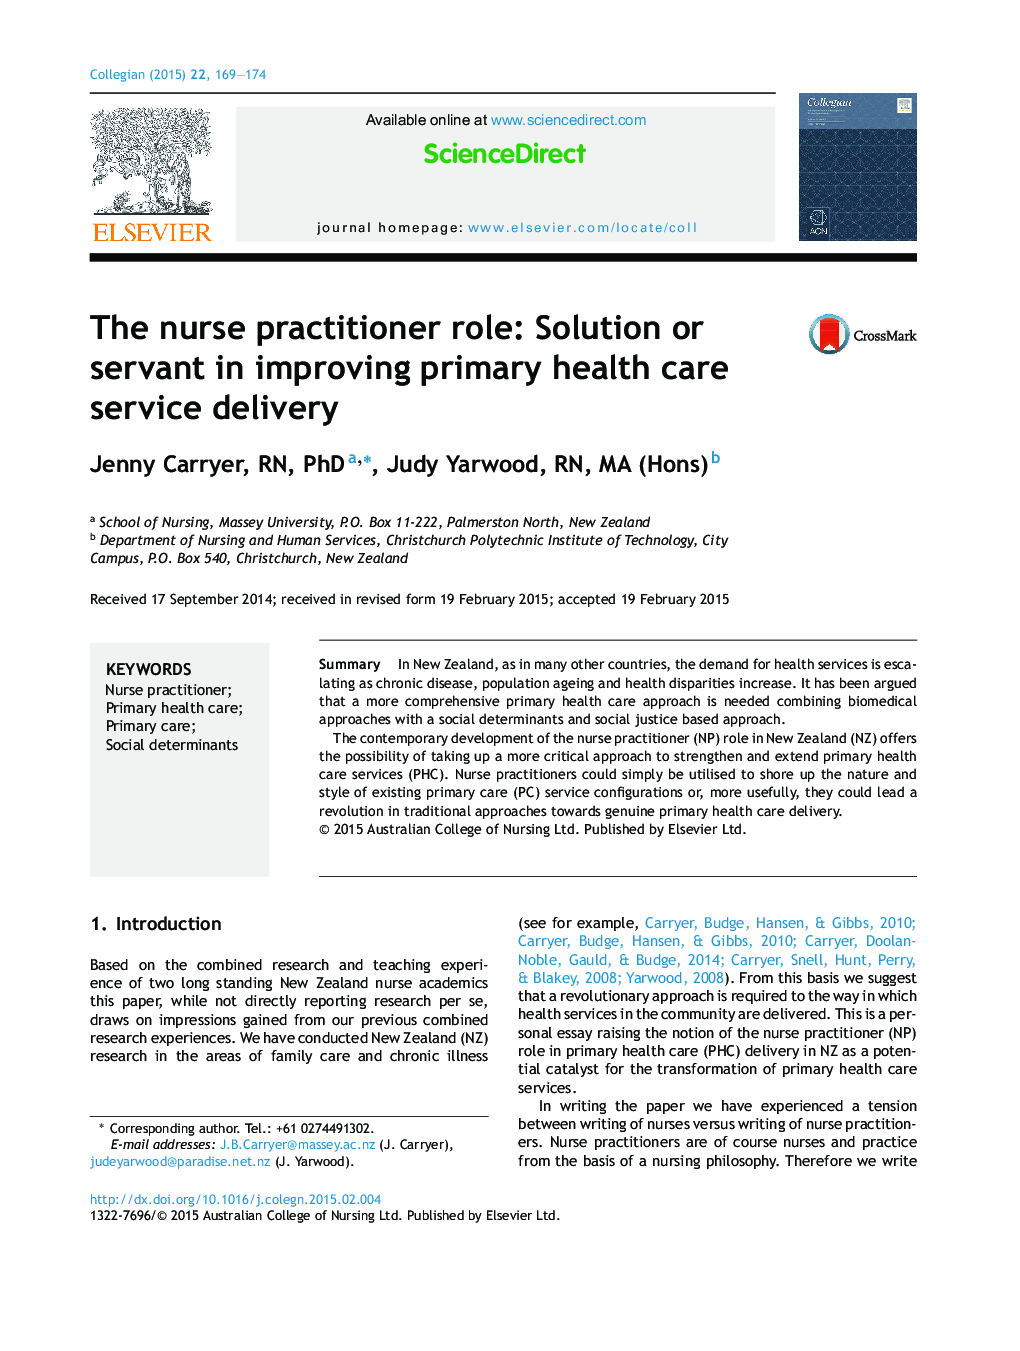 The nurse practitioner role: Solution or servant in improving primary health care service delivery